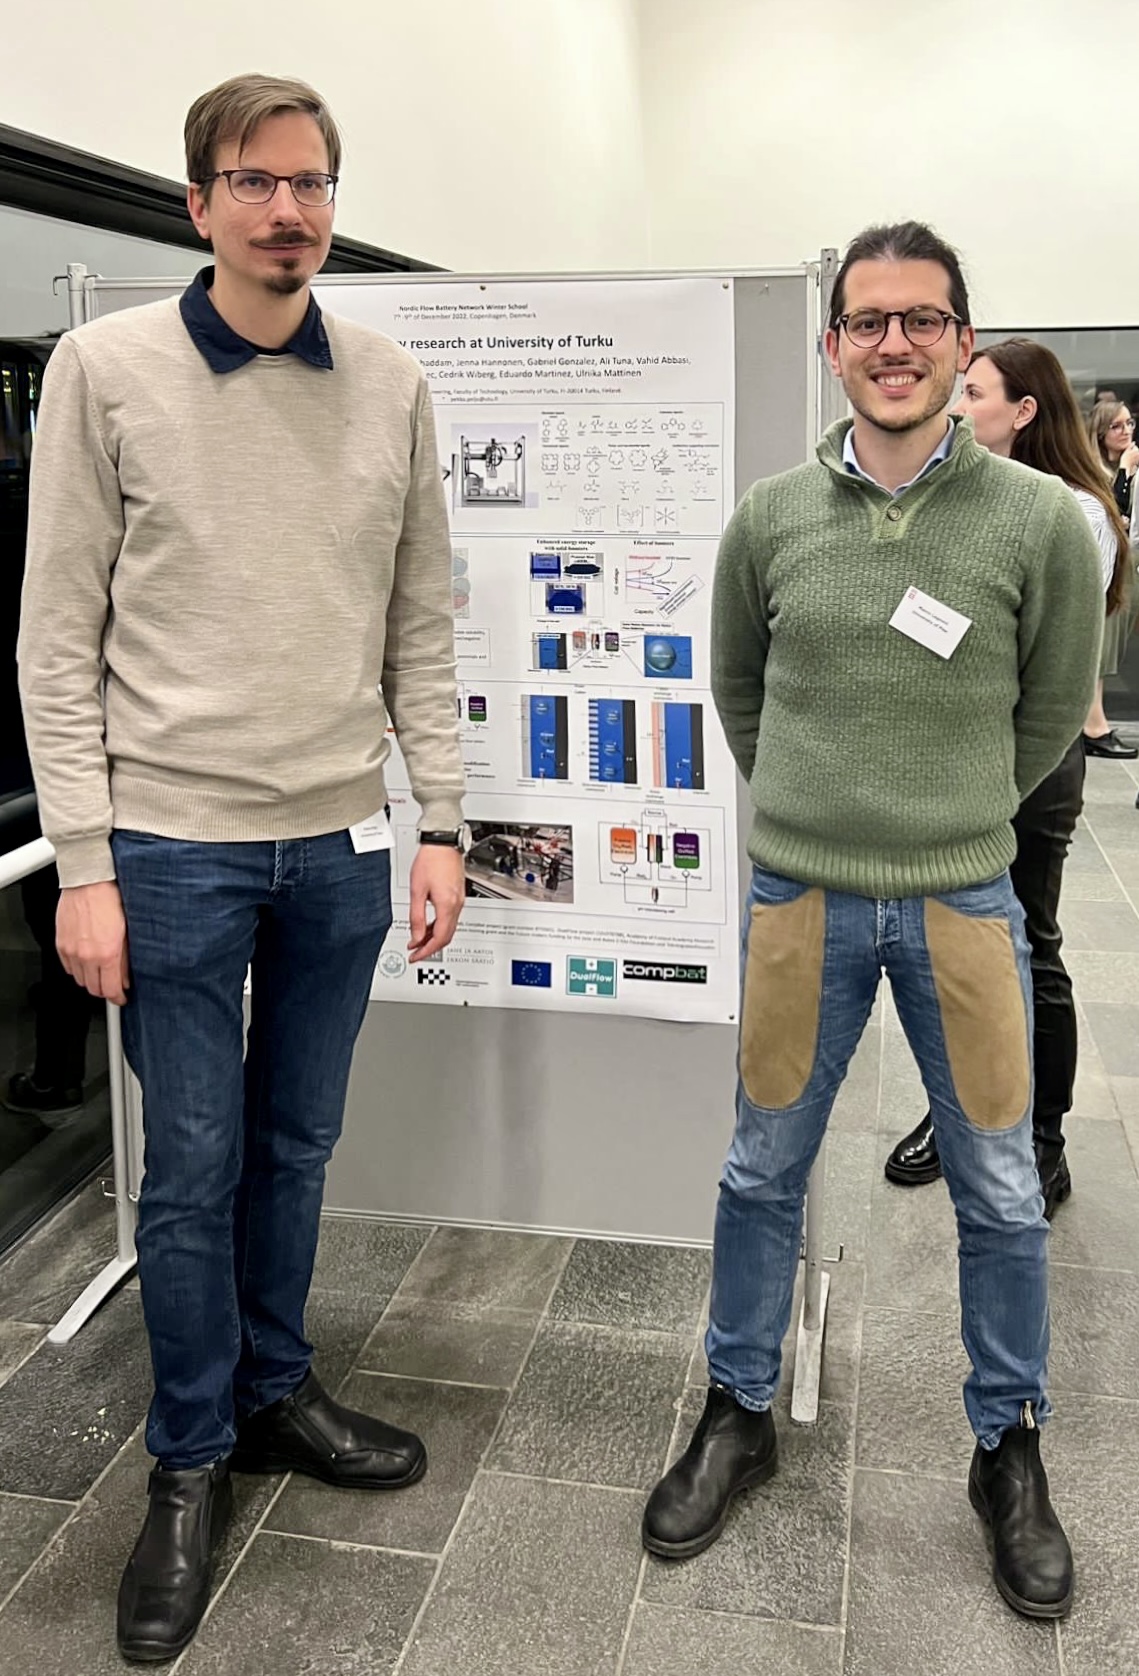 Here in the photo CompBat project coordinator Pekka Peljo from Turku University presenting us in the poster jointly with Marco Lagnoni, University of Pisa team member.